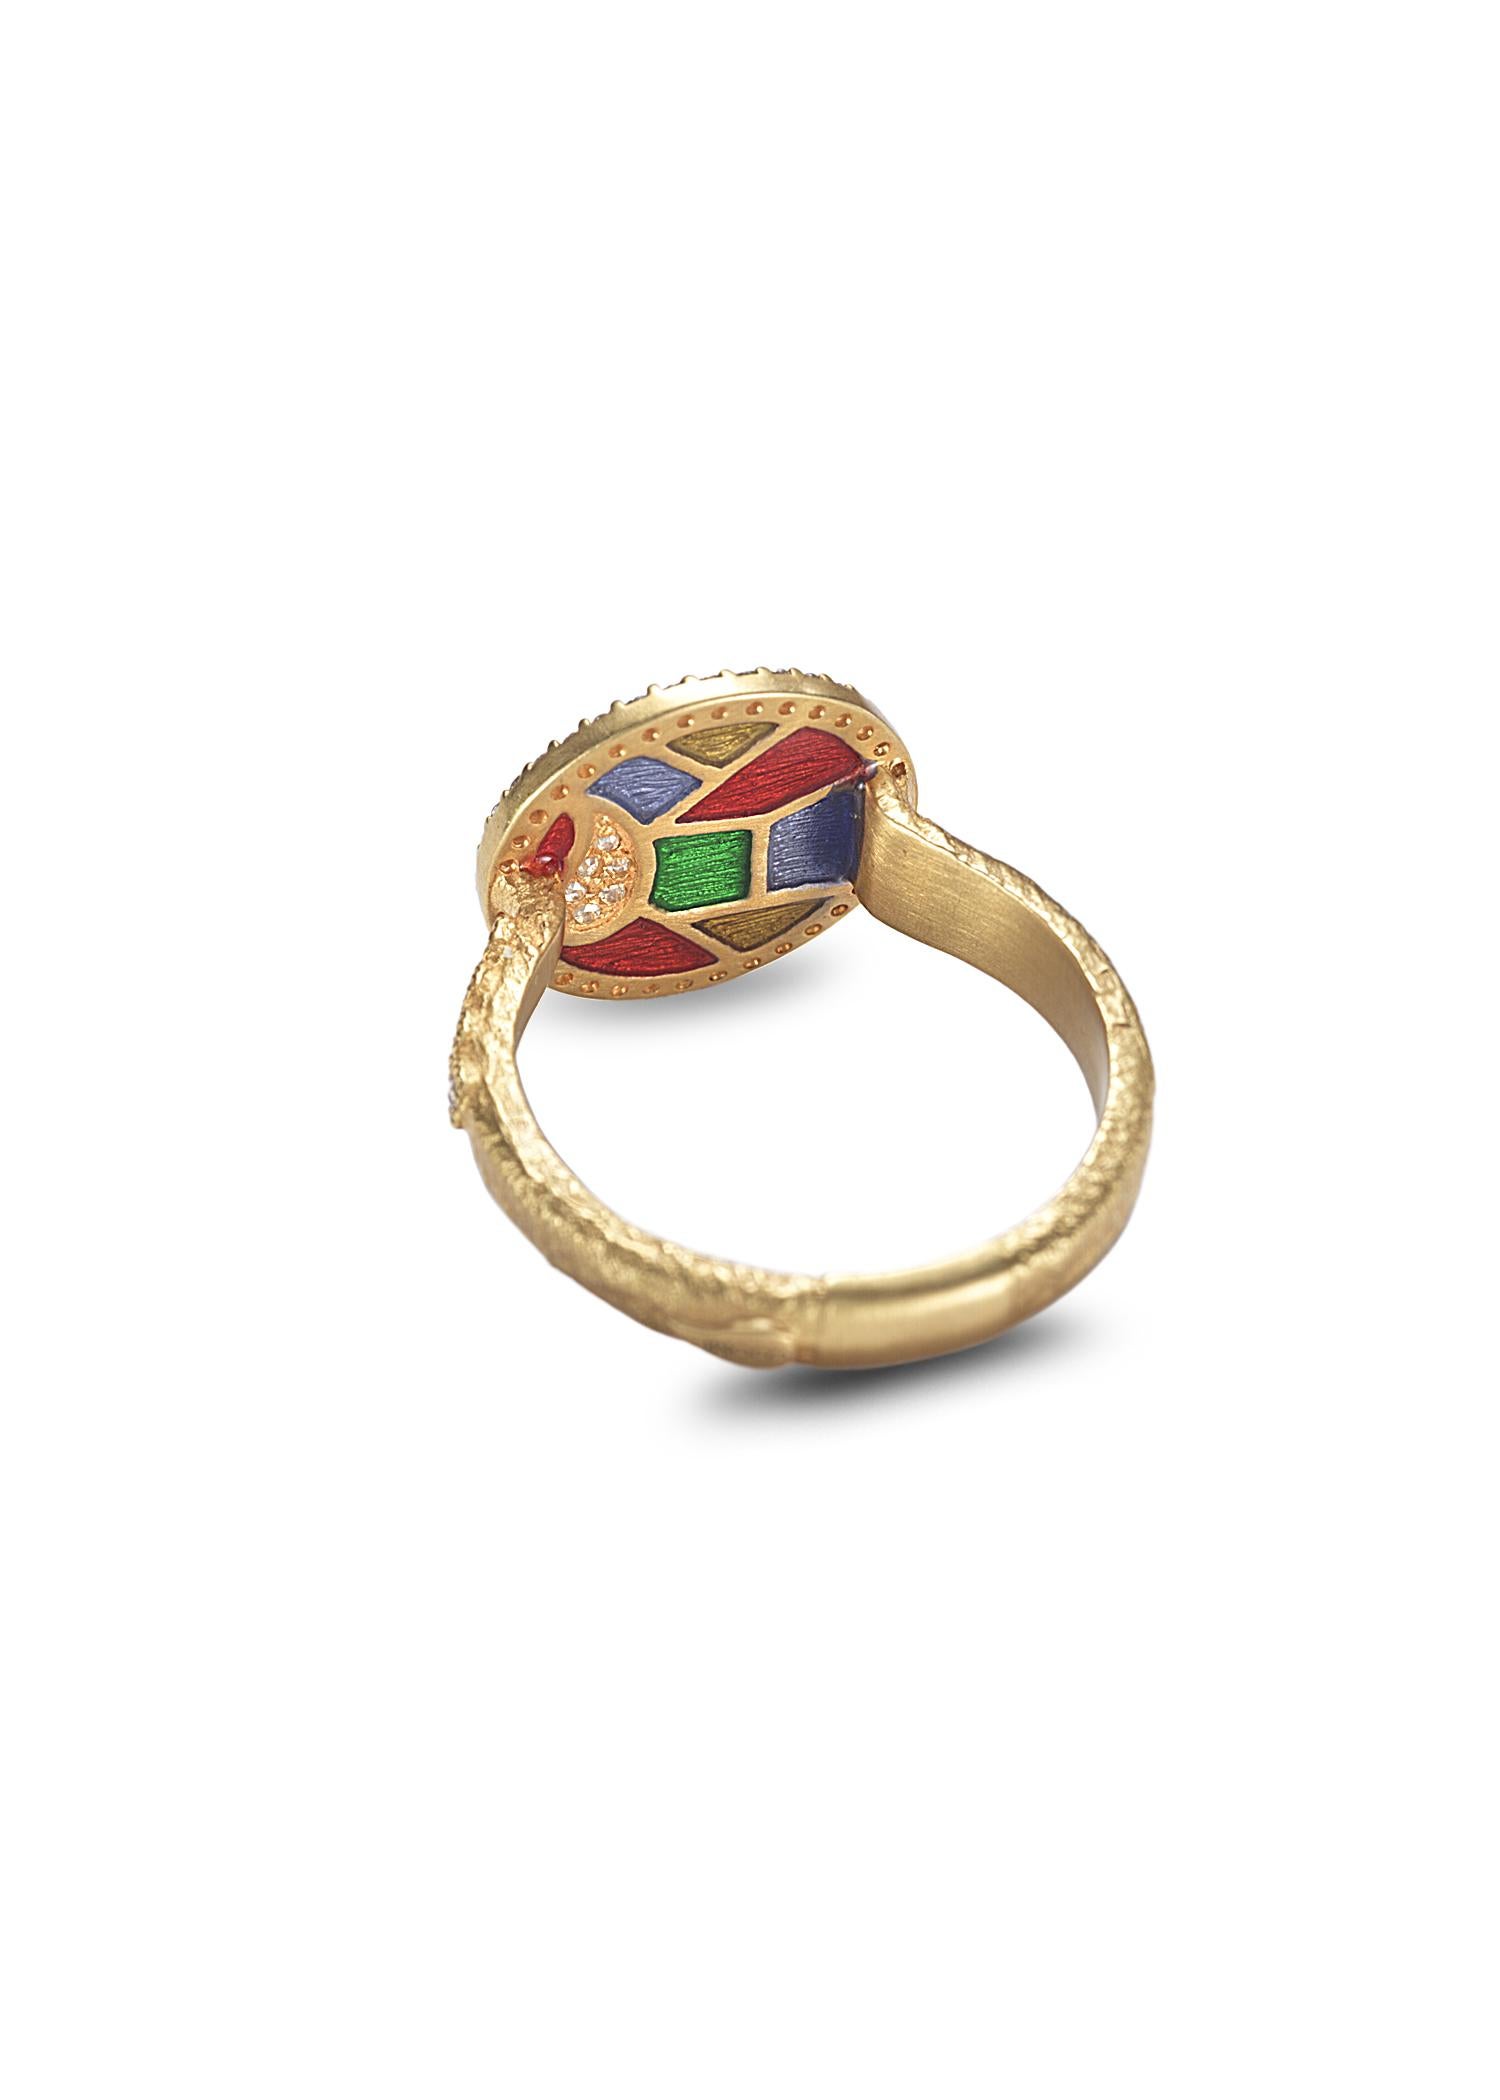 Hand made Coomi Sagrada collection ring with 